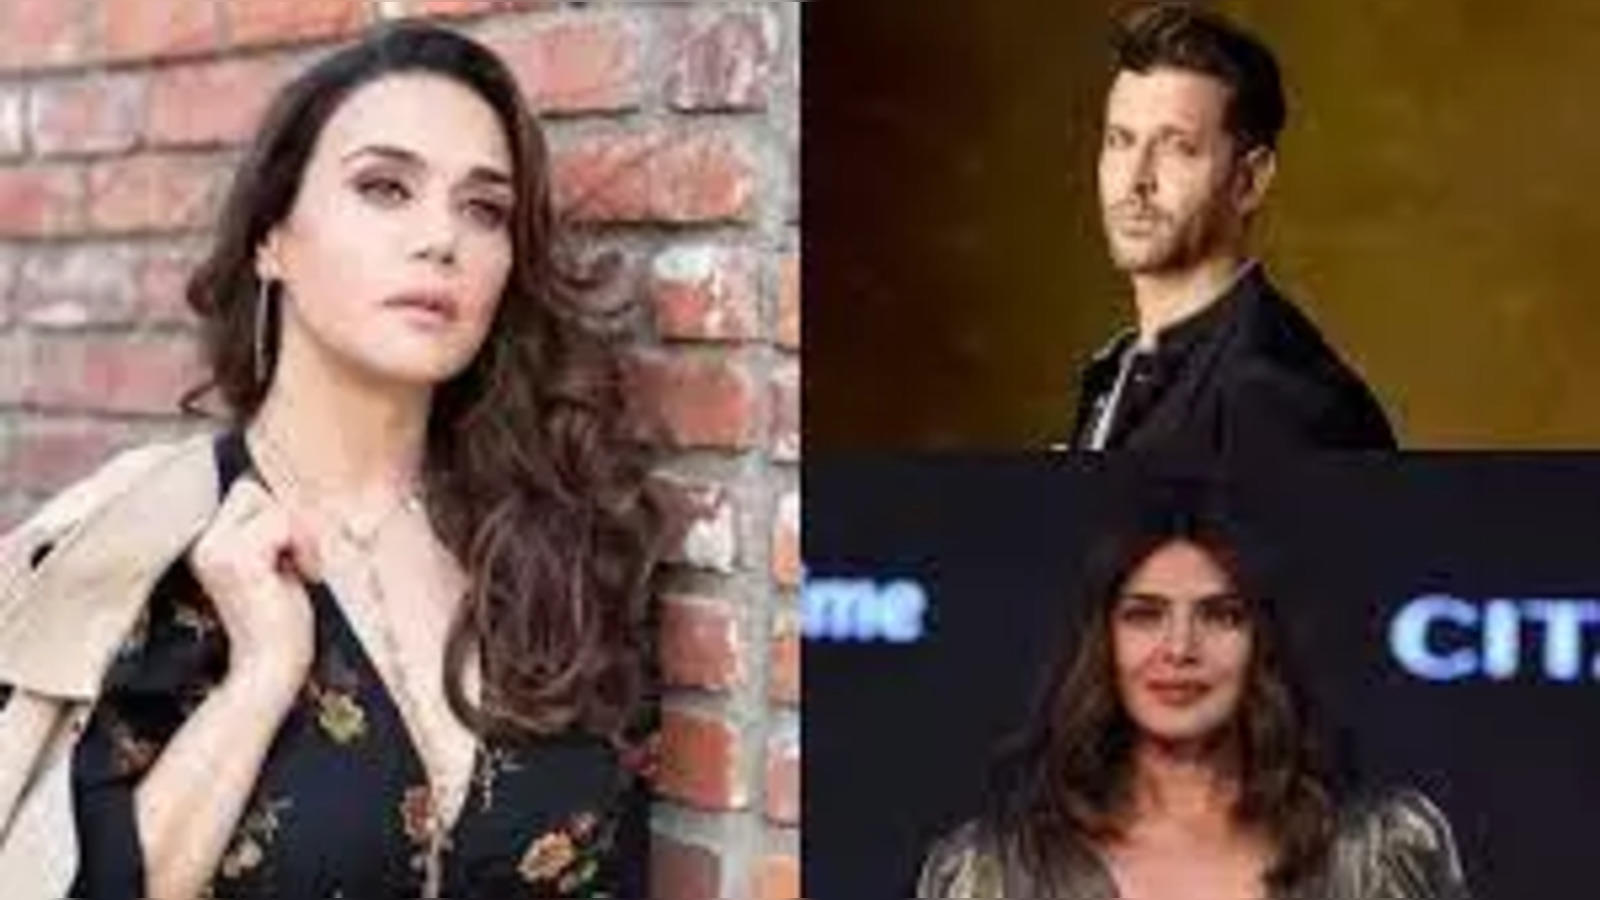 Preity Zinta Harassment News: Preity Zinta opens up about incidents of  harassment, garners support from Hrithik Roshan, Priyanka Chopra and others  - The Economic Times